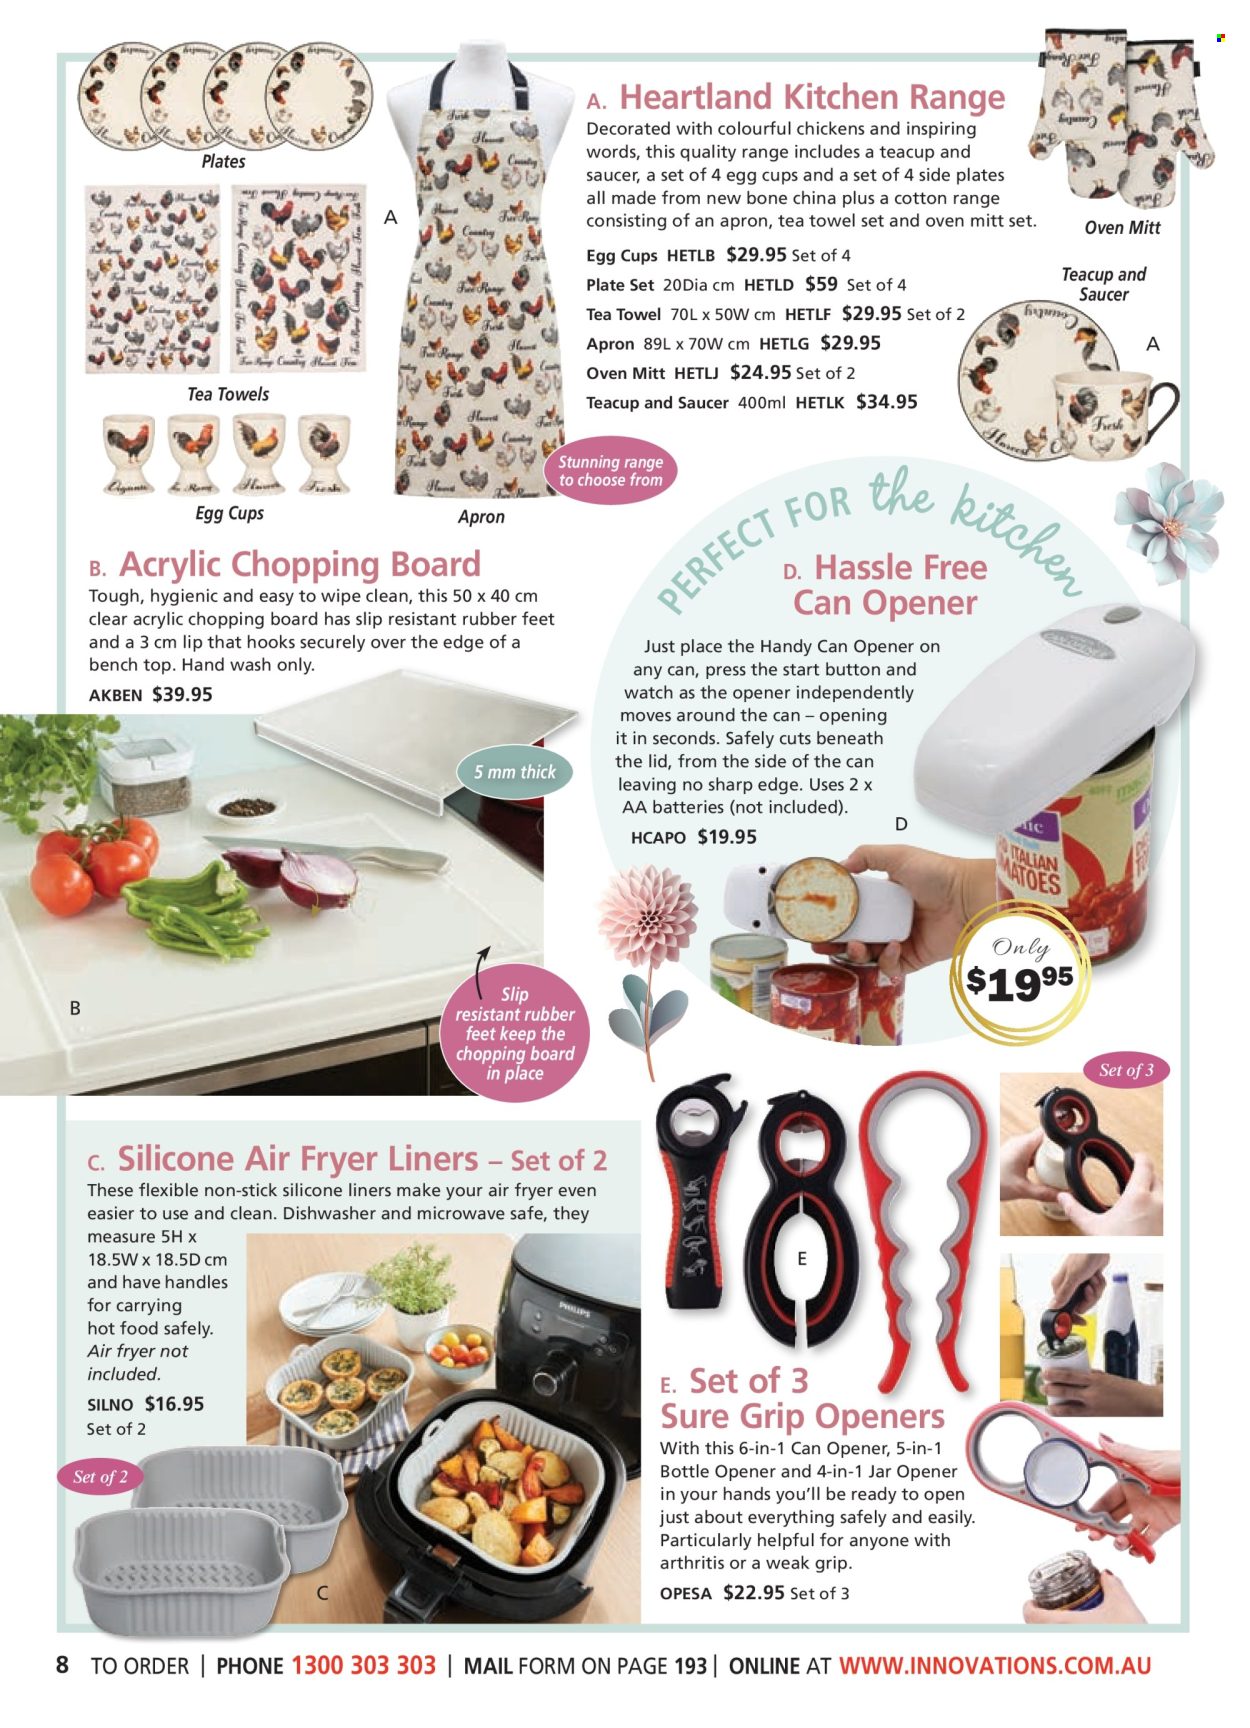 thumbnail - Innovations Catalogue - Sales products - lid, oven mitt, chopping board, saucer, bottle opener, cup, tin opener, apron, Sharp, tea towels, watch. Page 8.